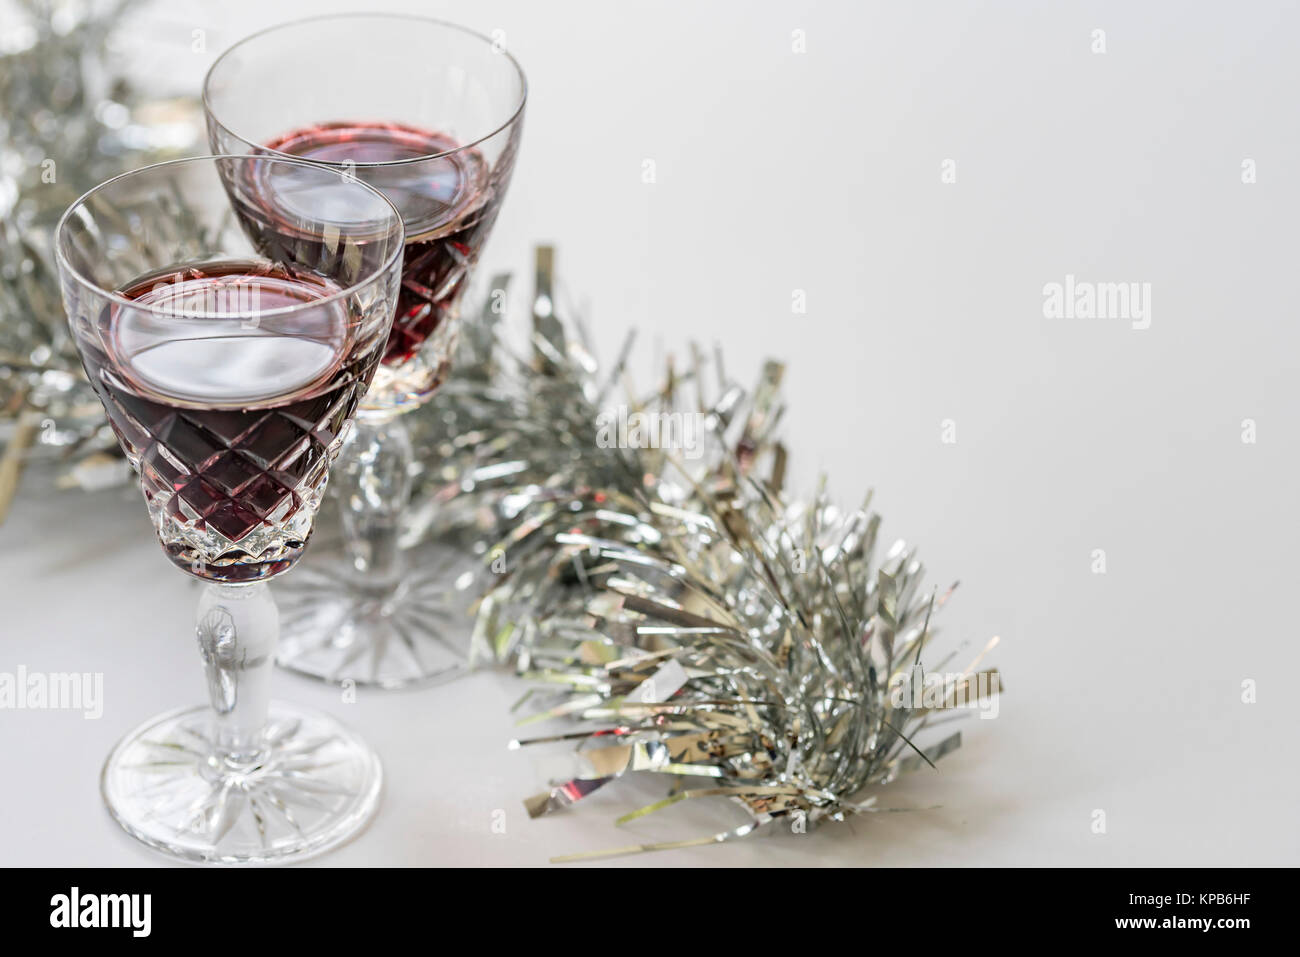 Glasses of red wine, silver on white background, top view. Christmas festive theme, wine glasses, silver tinsel shines, room for text. Stock Photo